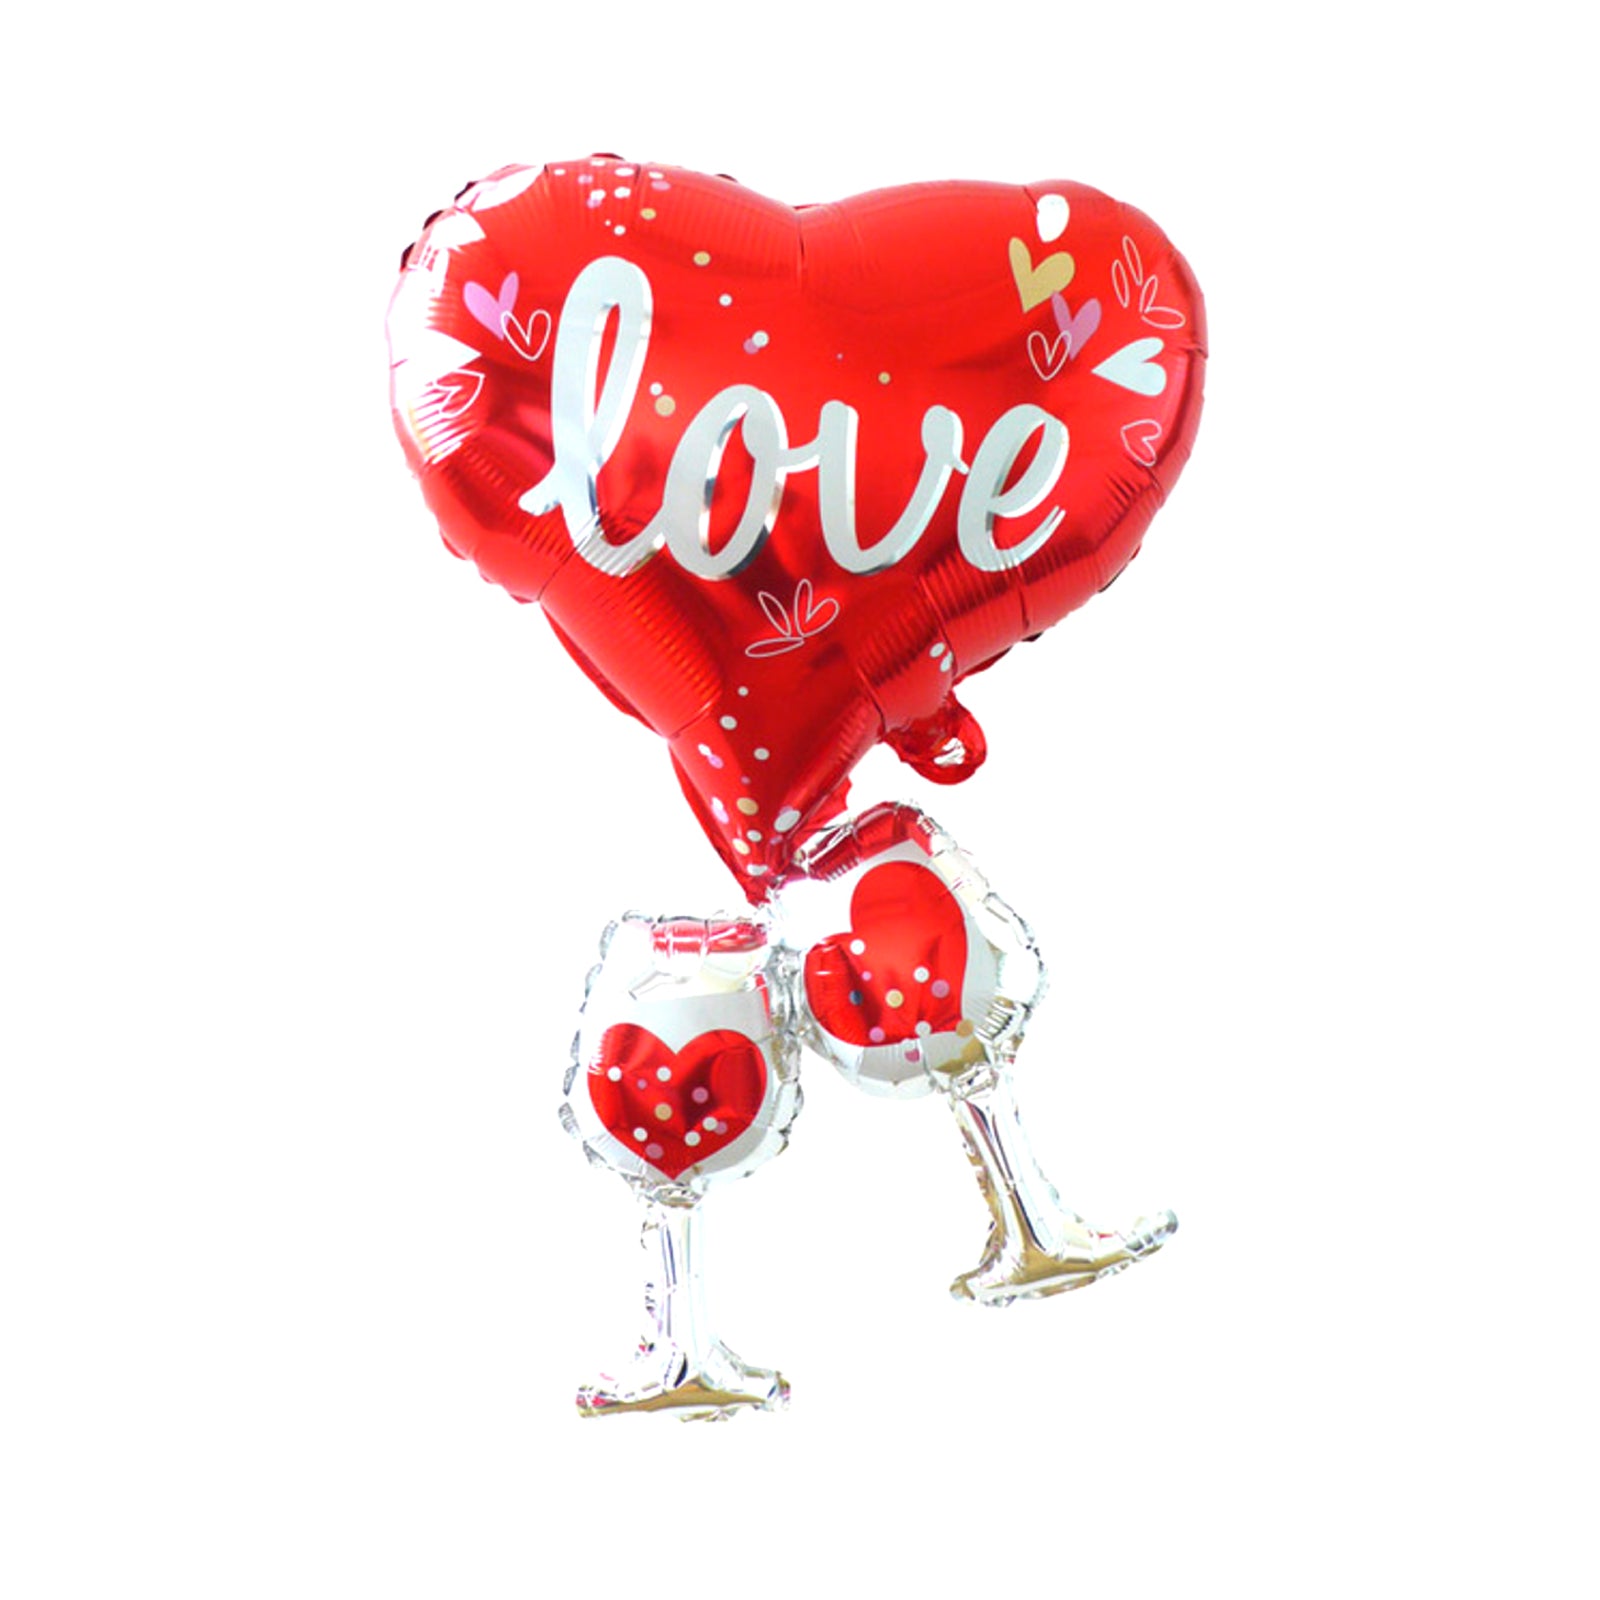 Cheers For Love Foil Balloon